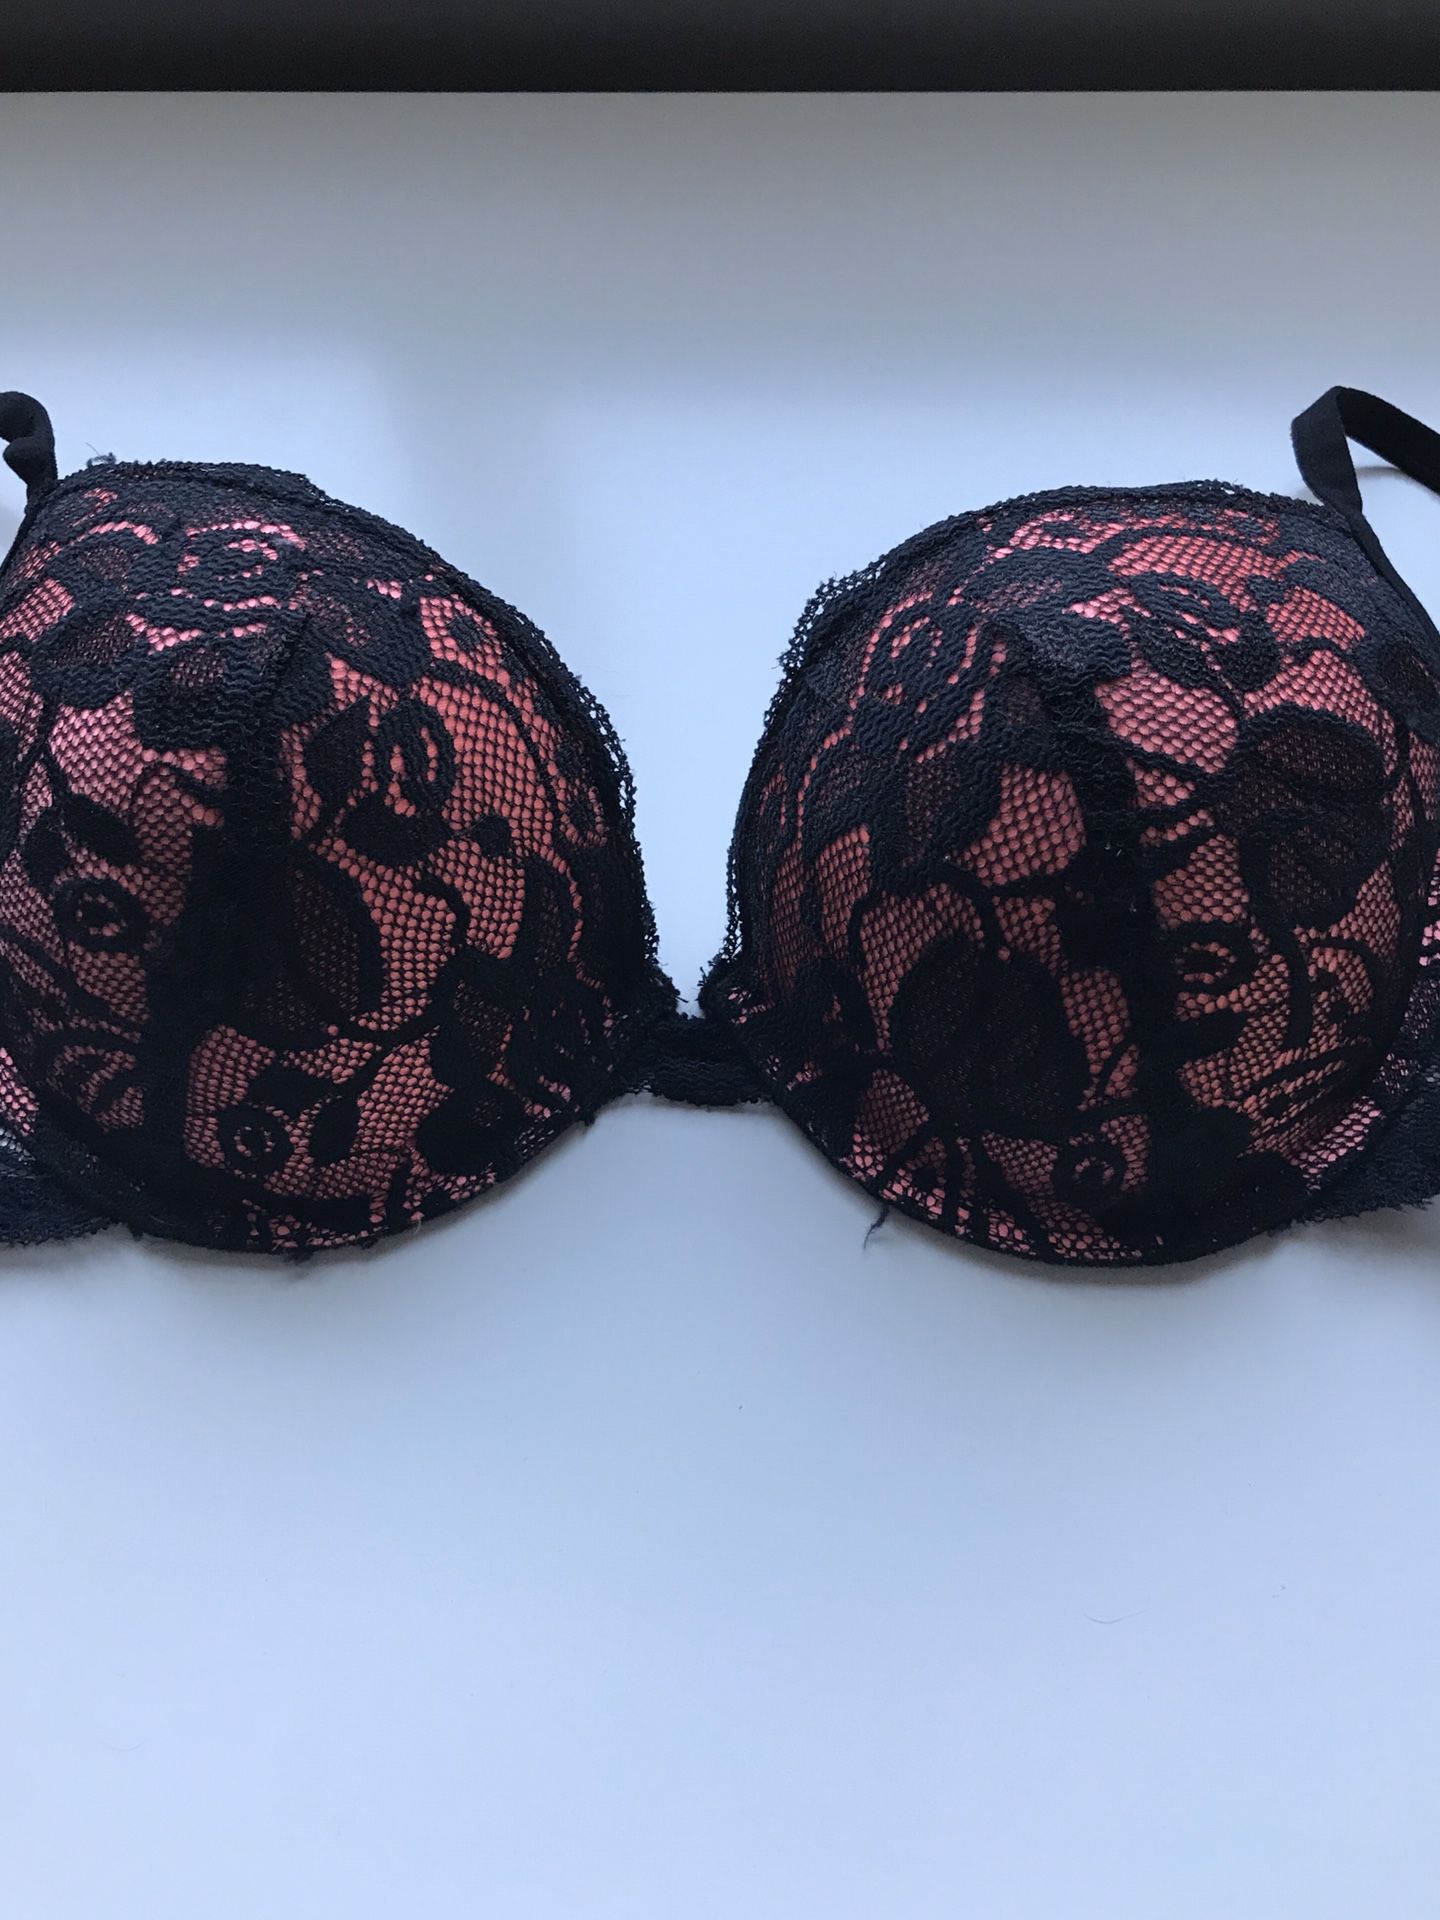 Hot pink and black lace push-up bra - 36C